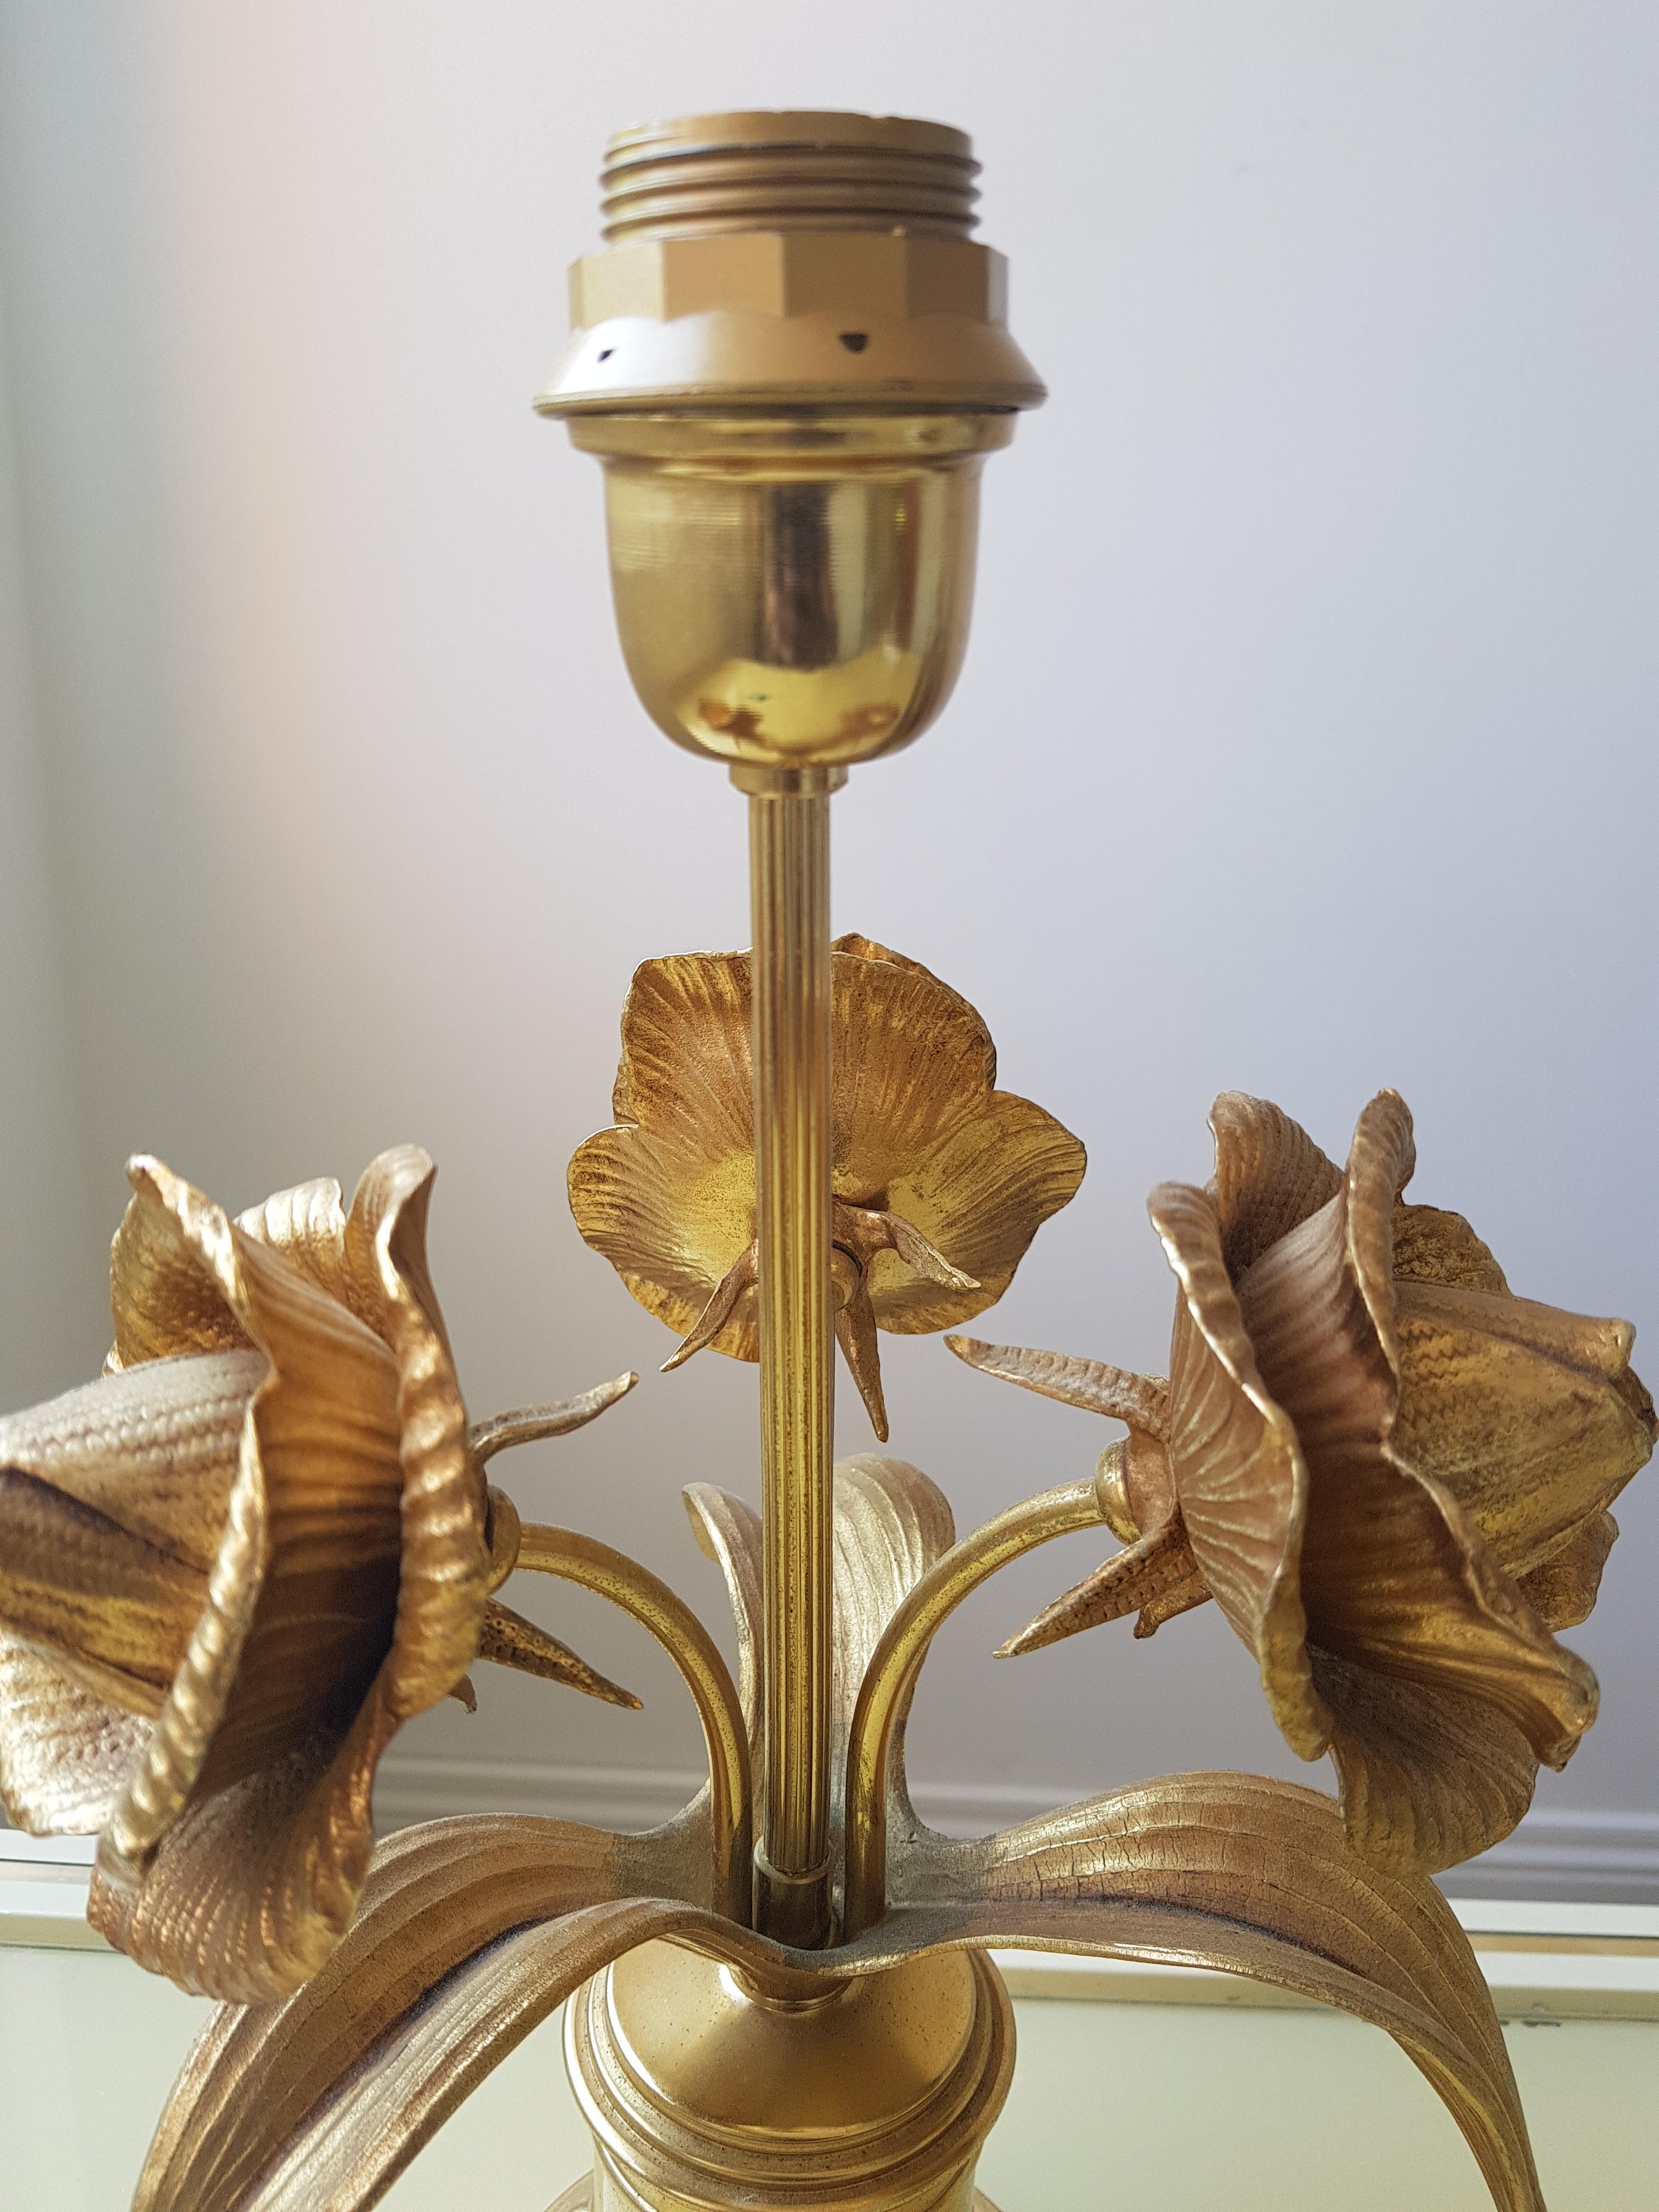 Very detailed flower lamp by french firm Maison Jansen, Hollywood Regency style, could also be Art Deco. Its truly an eyecatcher!  The lamp has 3 blossom flowers covered with leaves and is all brass. Very nice living room item.
Comes with free